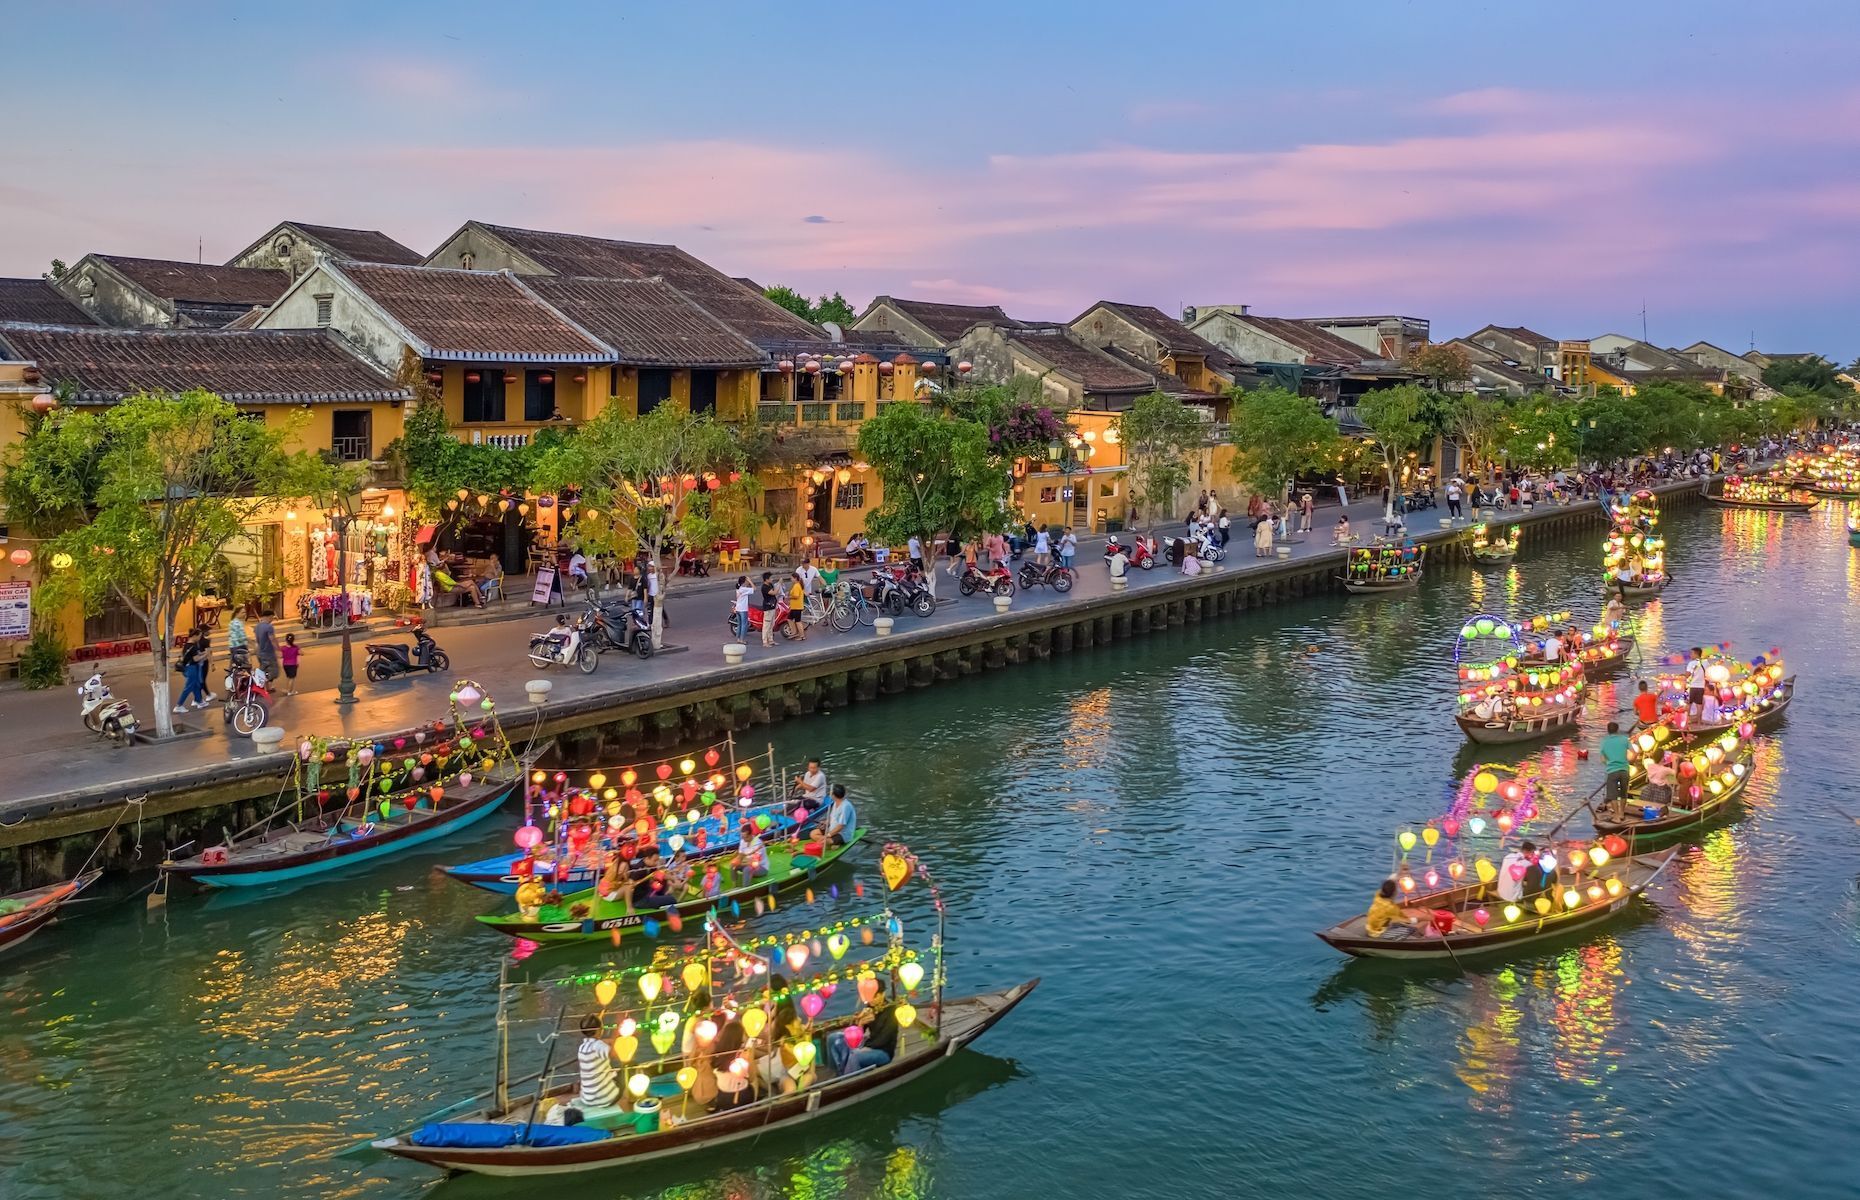 <p>Located on Vietnam’s central coast, <a href="https://vietnam.travel/things-to-do/the-best-ways-to-explore-the-ancient-town-of-hoi-an" class="atom_link atom_valid" rel="noreferrer noopener">Hoi An</a> will immediately enchant visitors with its ancient architecture, covered bridge, and narrow streets illuminated at night by colourful lanterns. The area is famous as a former trading port on the Silk Road and is home to many talented tailors ready to create high-quality bespoke garments. Plan your stay between February and May to make the most of its historical district and local markets. Plus, take a bike tour through the surrounding rice paddies.</p>